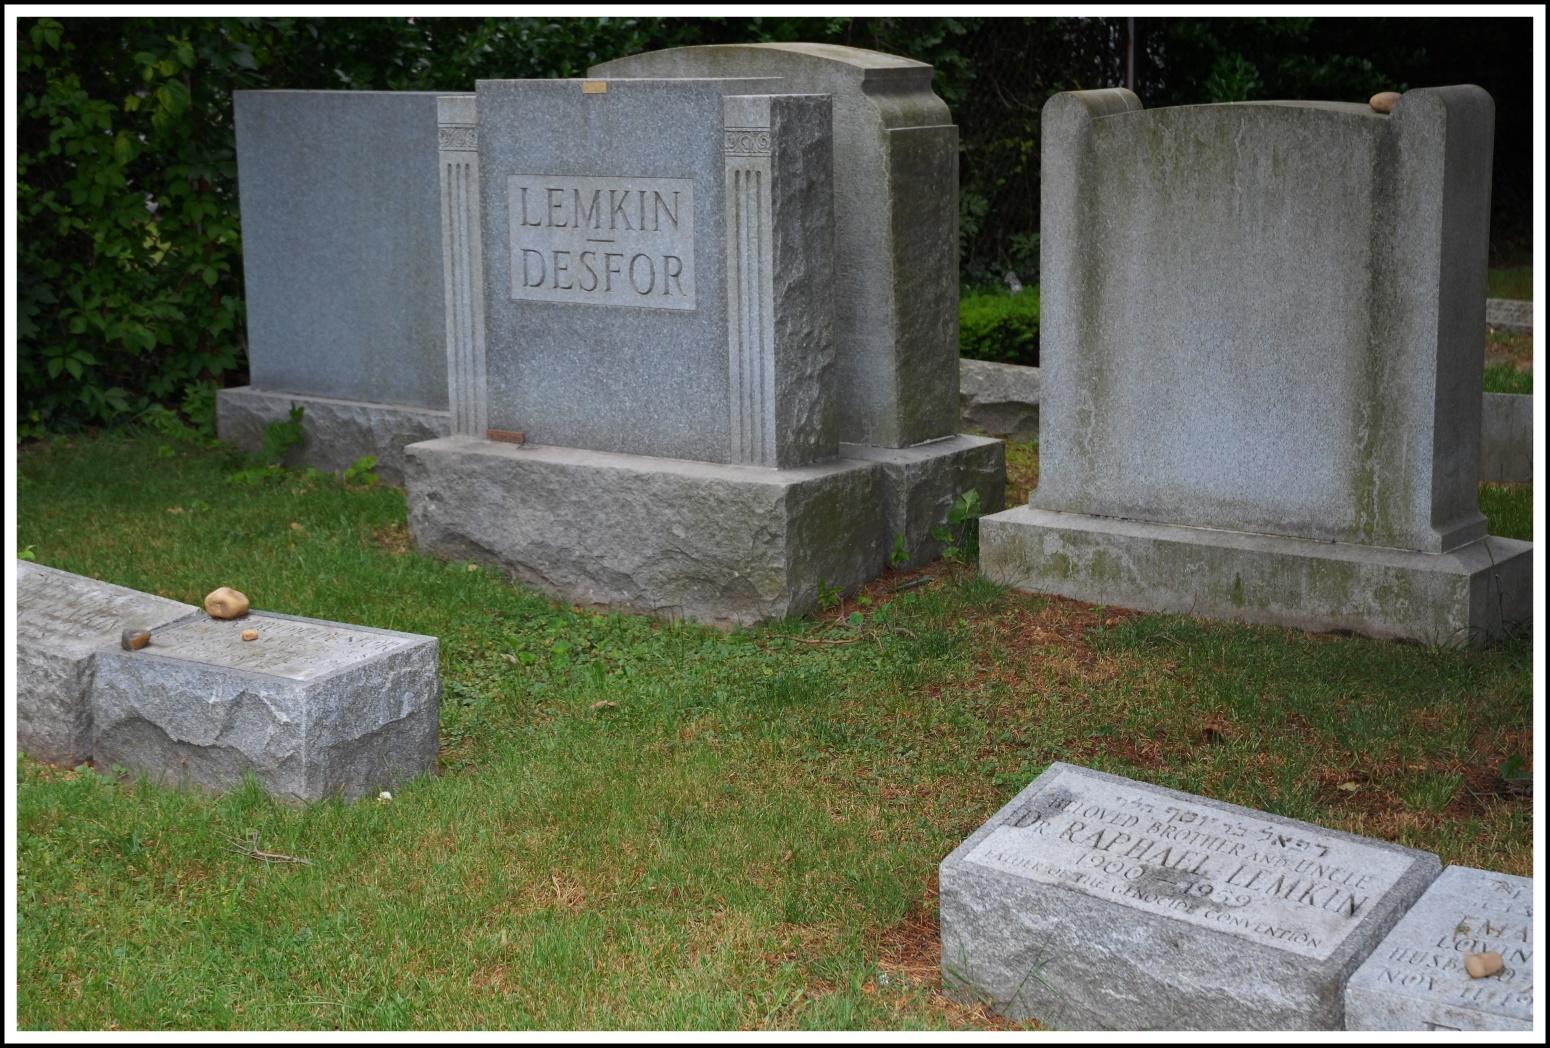 A group of tombstones in a grassy area

Description automatically generated with medium confidence